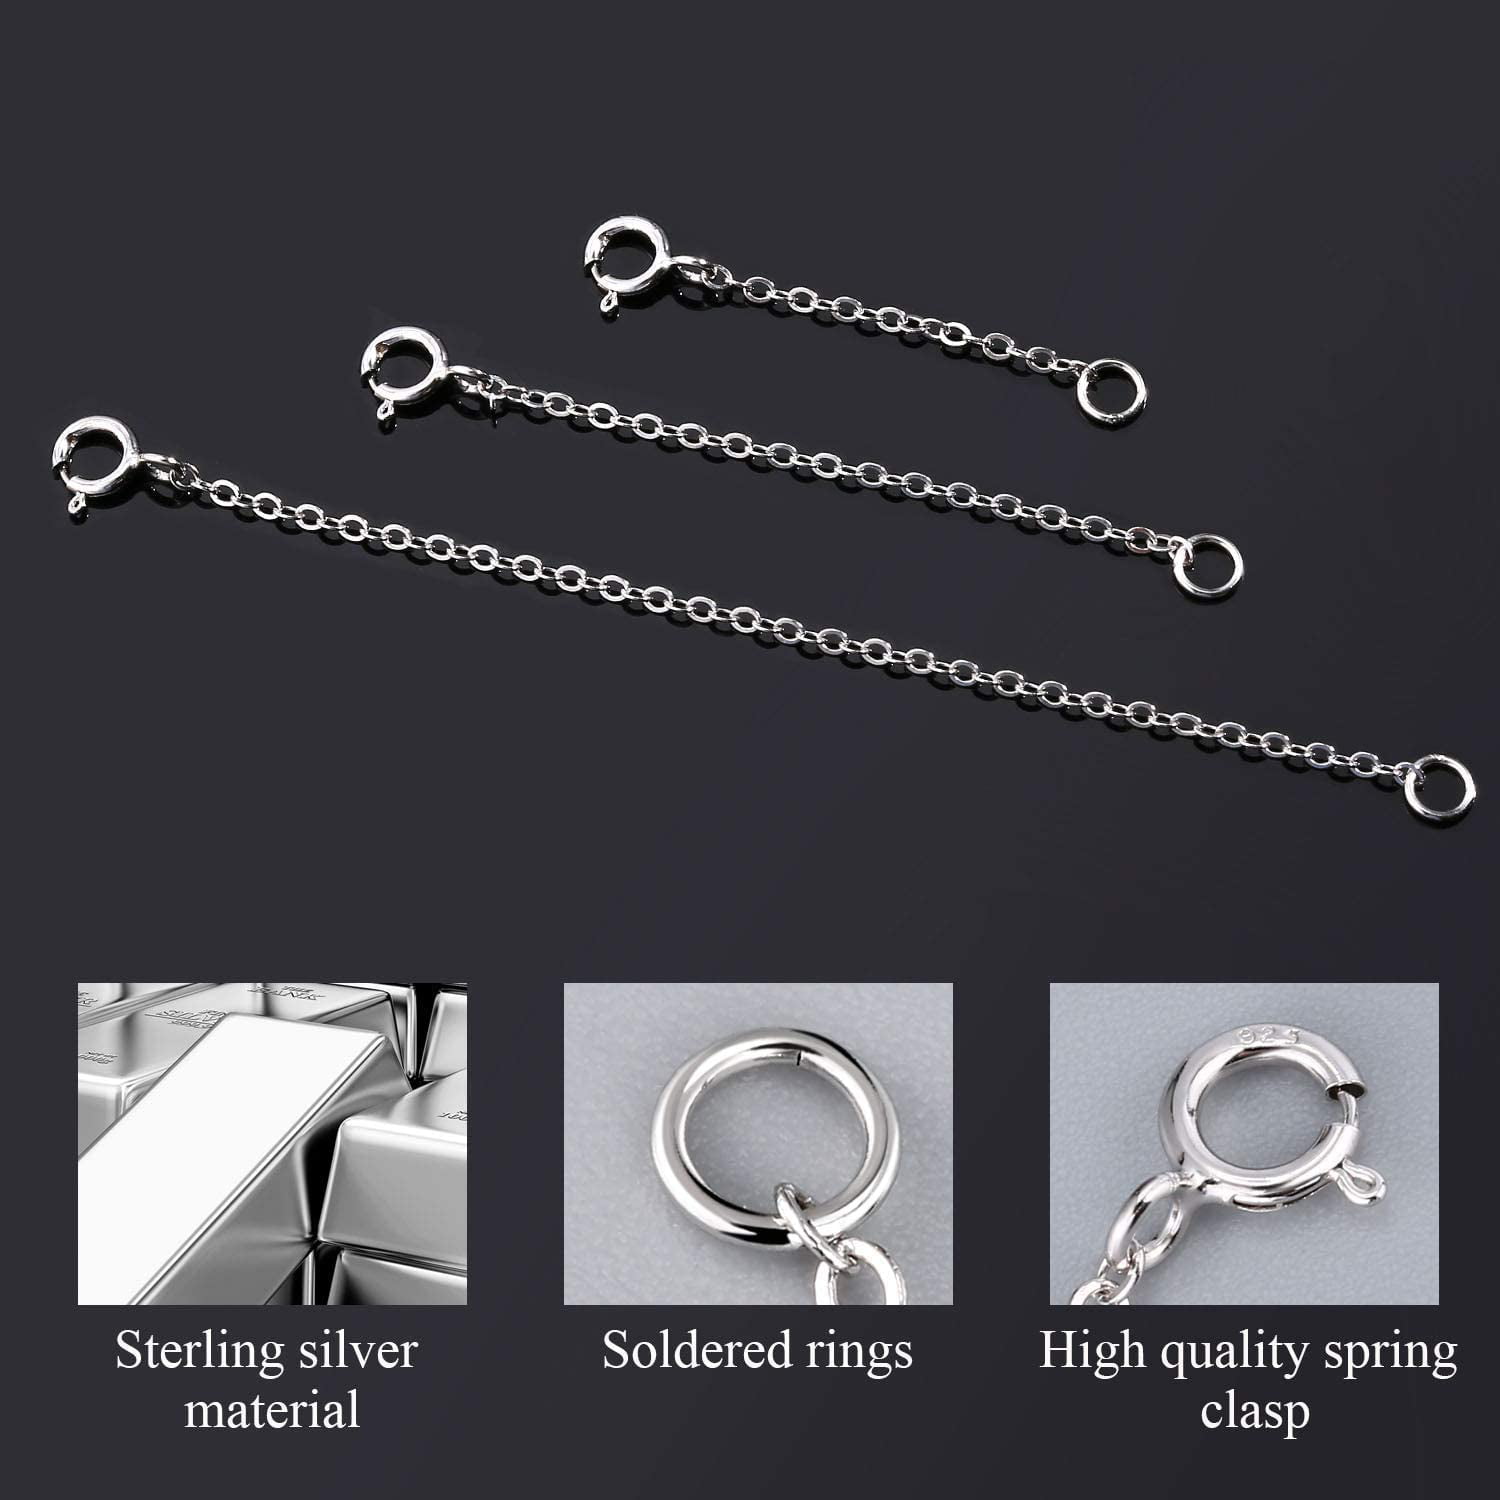 3 Pcs 925 Sterling Silver Necklace Extenders for Women Durable Strong  Removable Necklace Bracelet Anklet Extension for Jewelry Making(1 2 3 Inch,  Silver) 